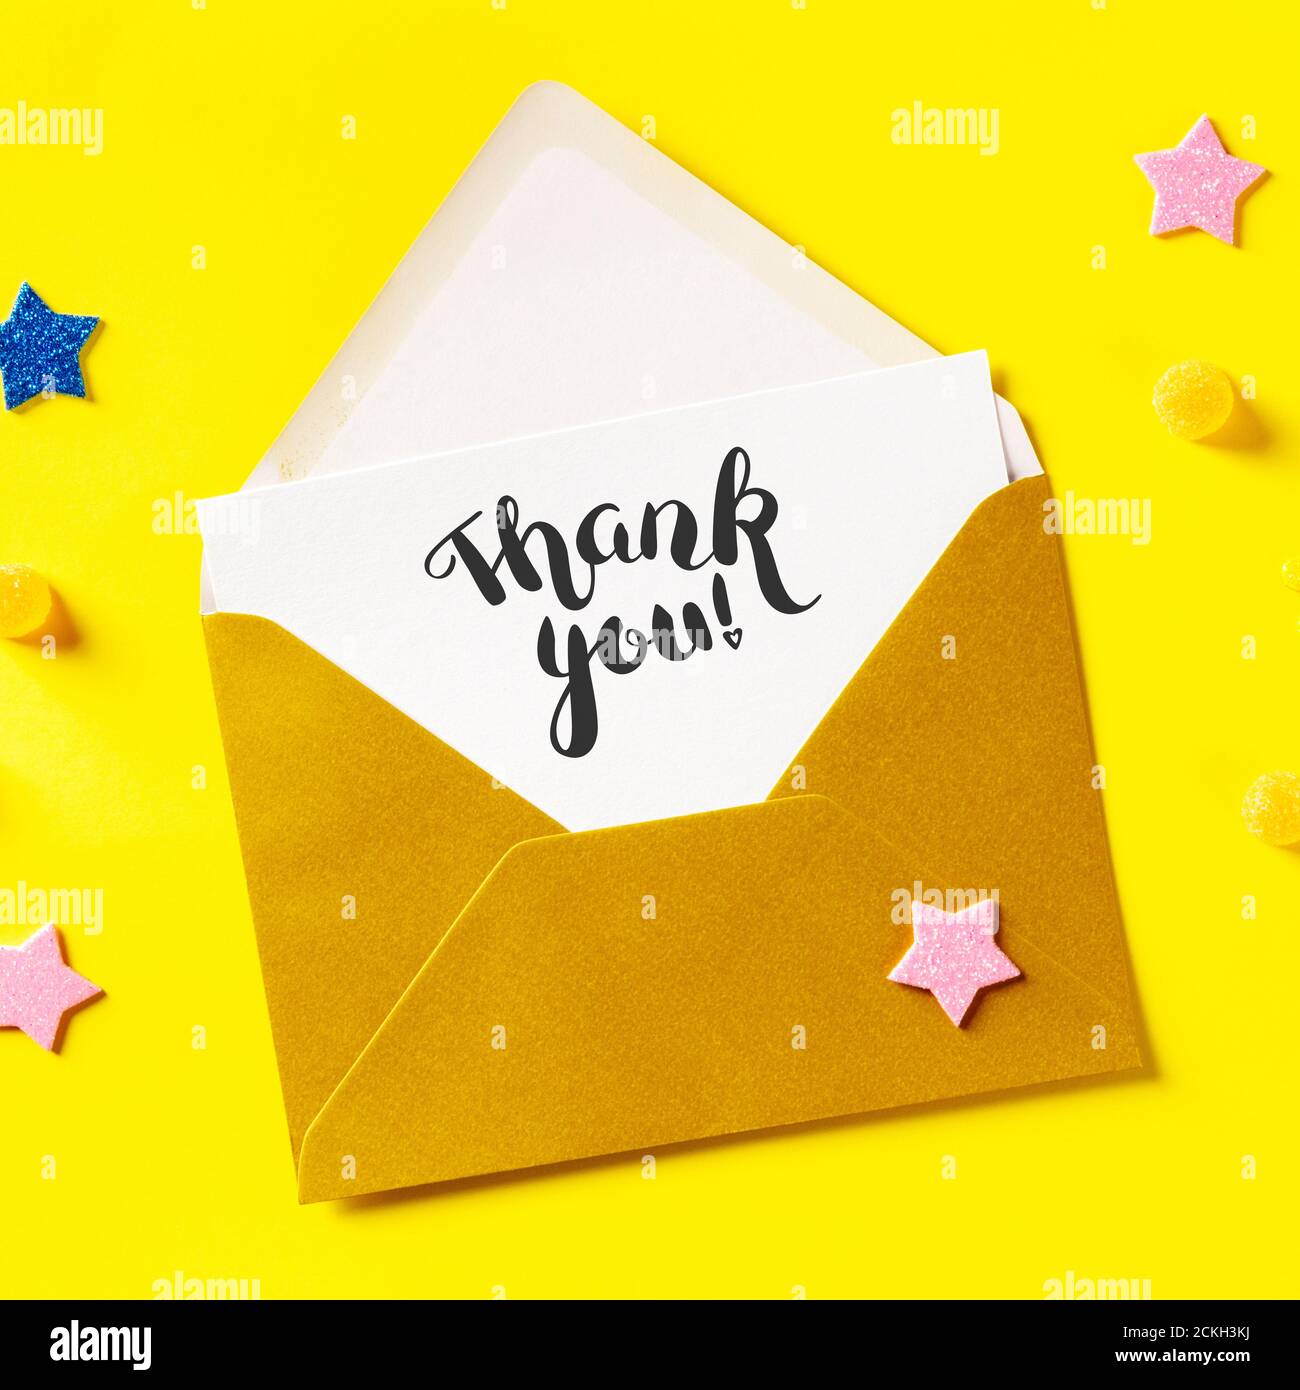 Thank you card in a golden envelope, overhead square shot on a yellow background with glitter stars Stock Photo